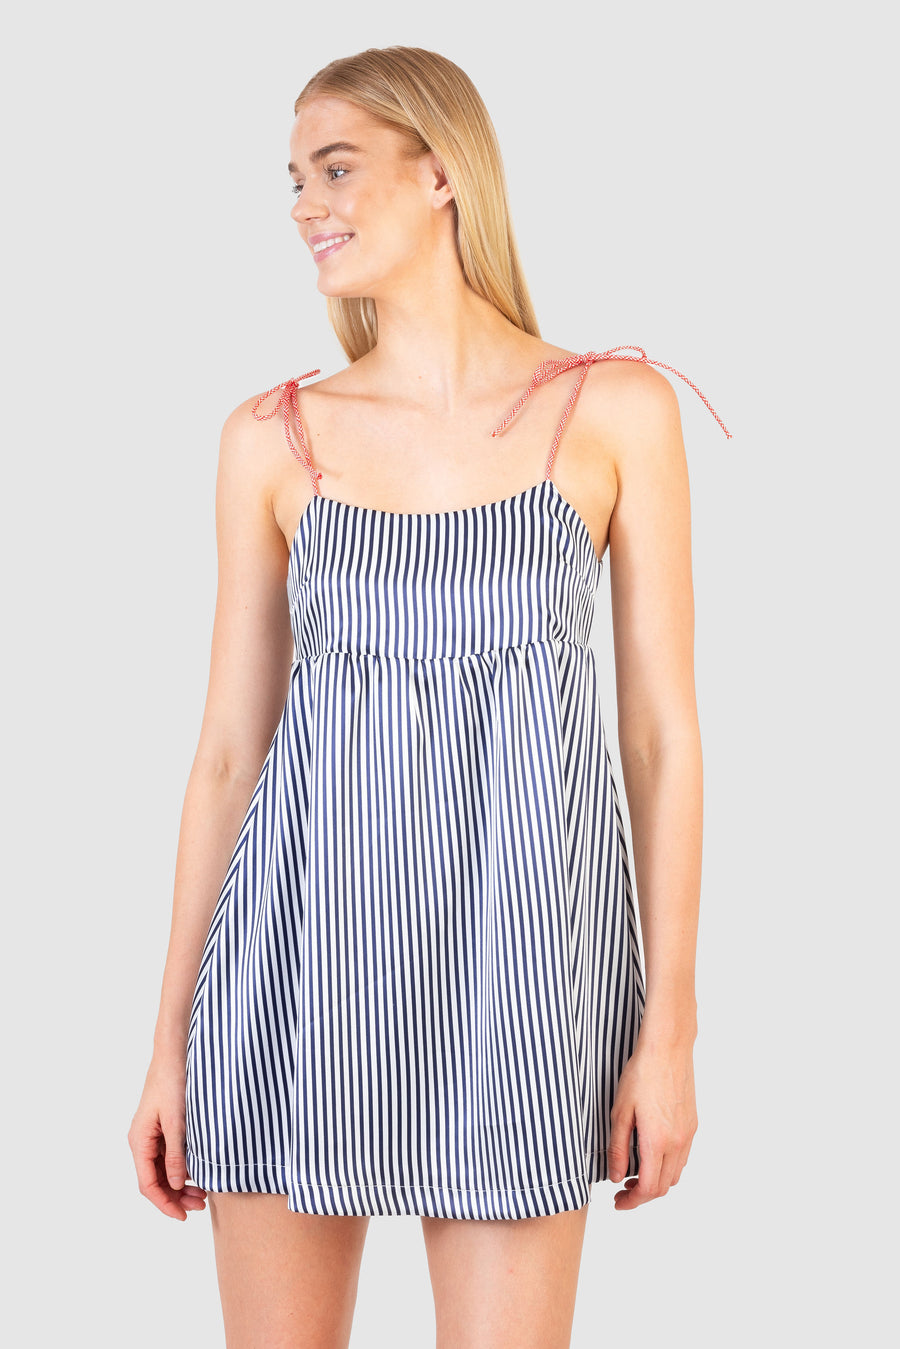 Alexis Dress Navy Stripe *Limited*Edition*